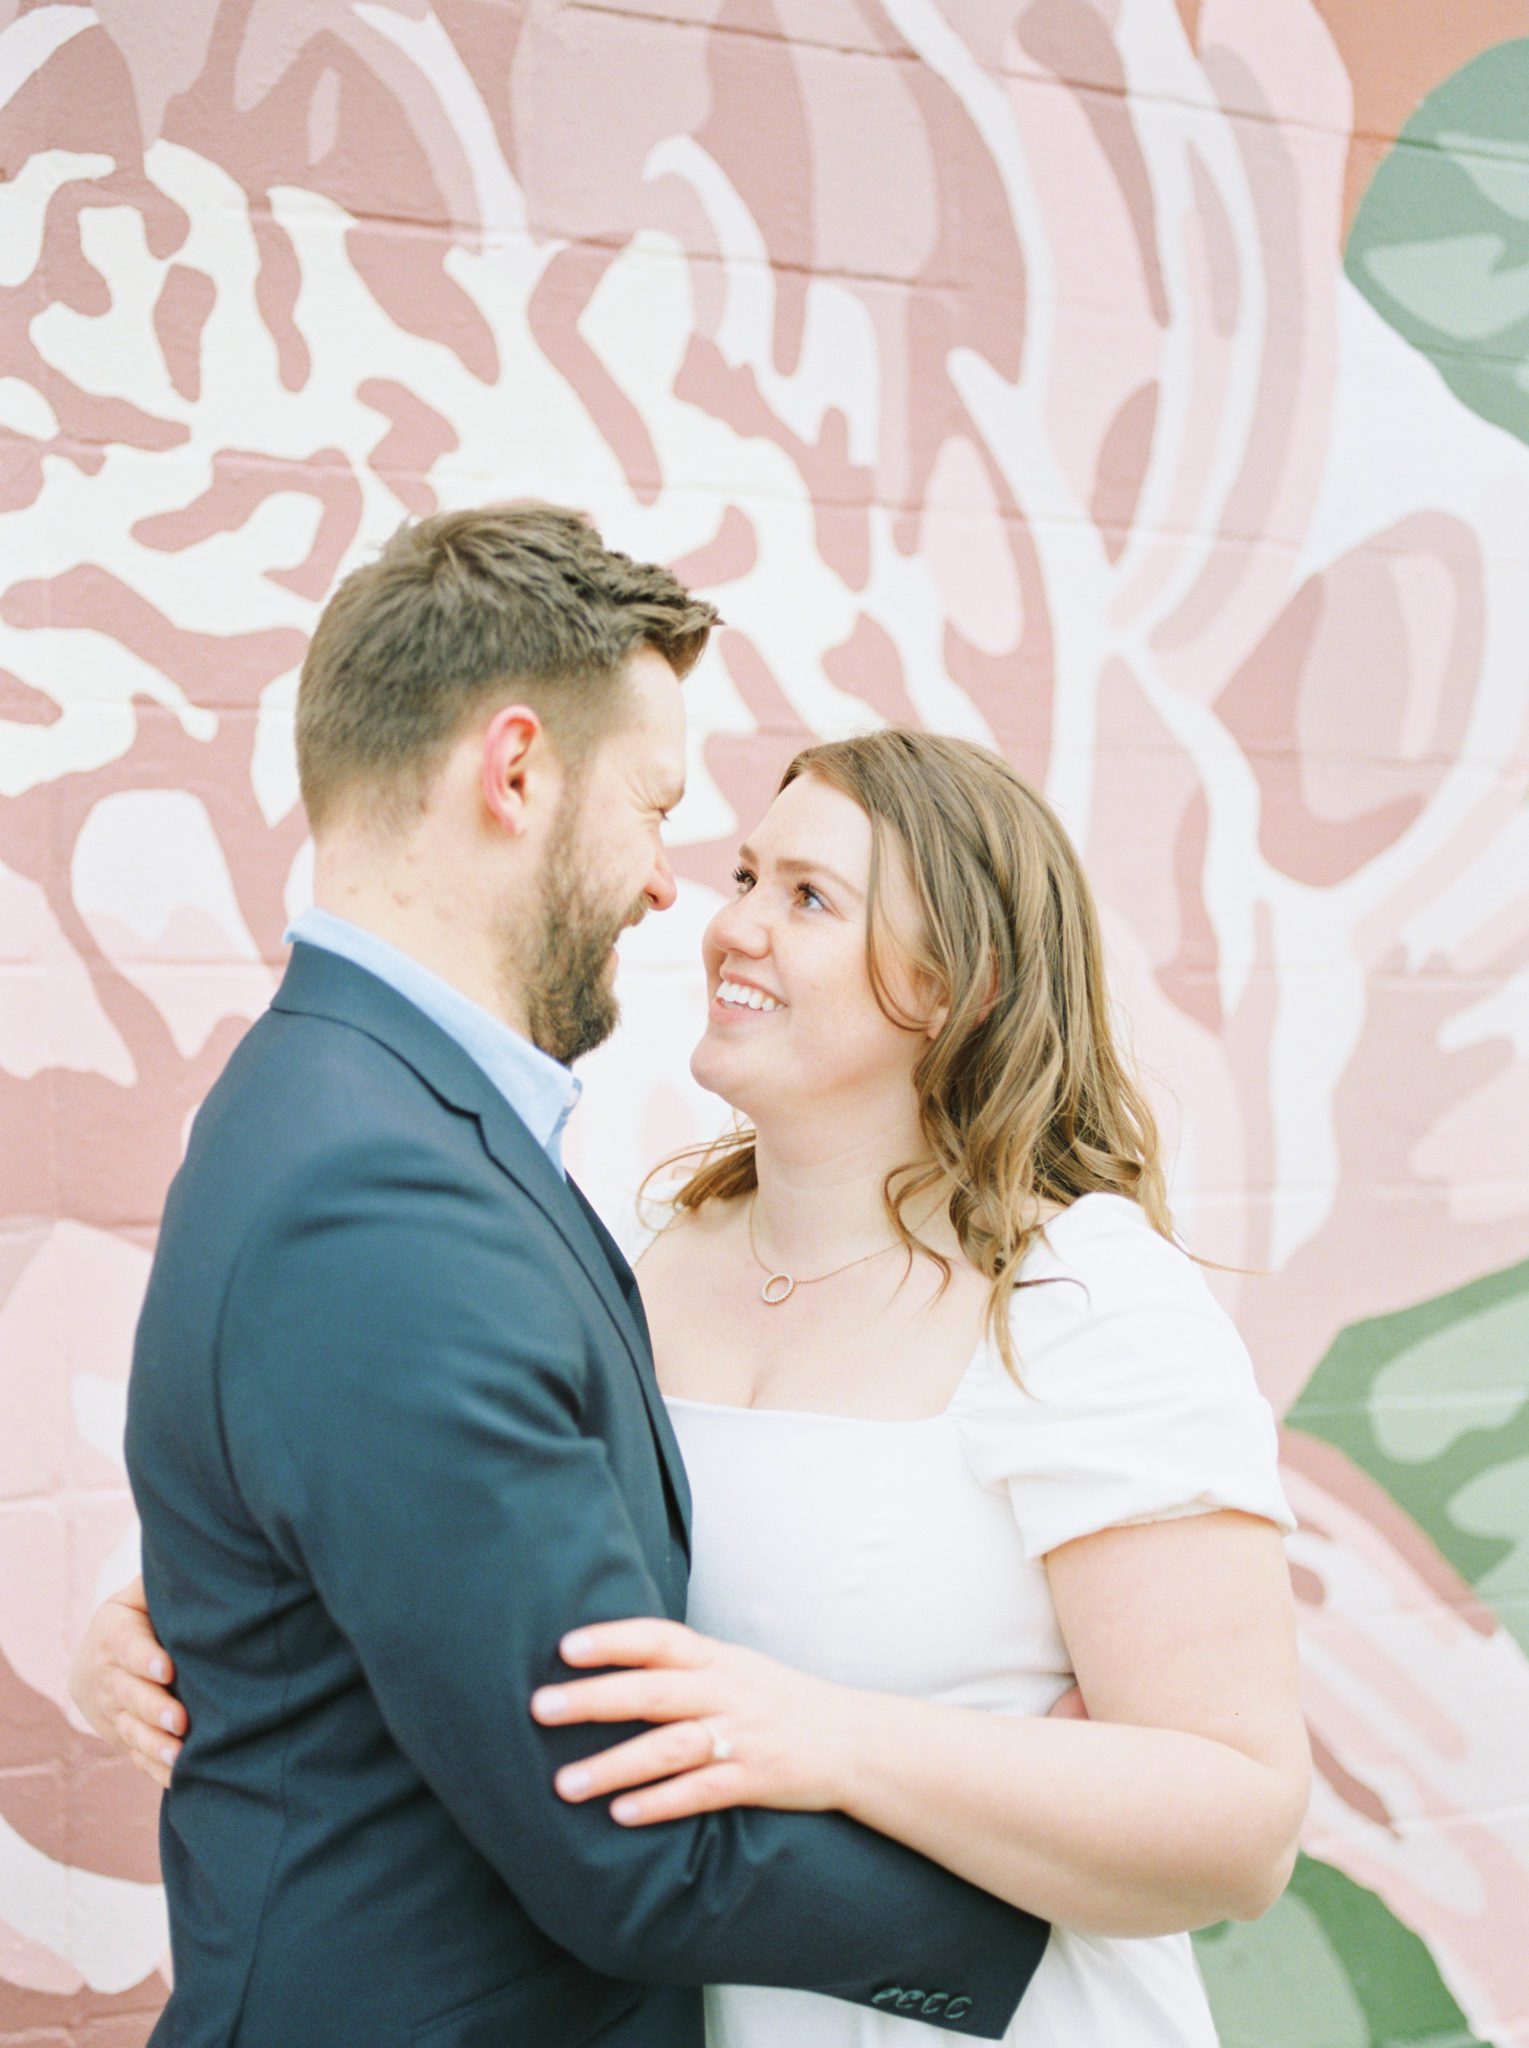 Stylish engagement photos in front of a pink floral mural in Edmonton Alberta at Manchester Square